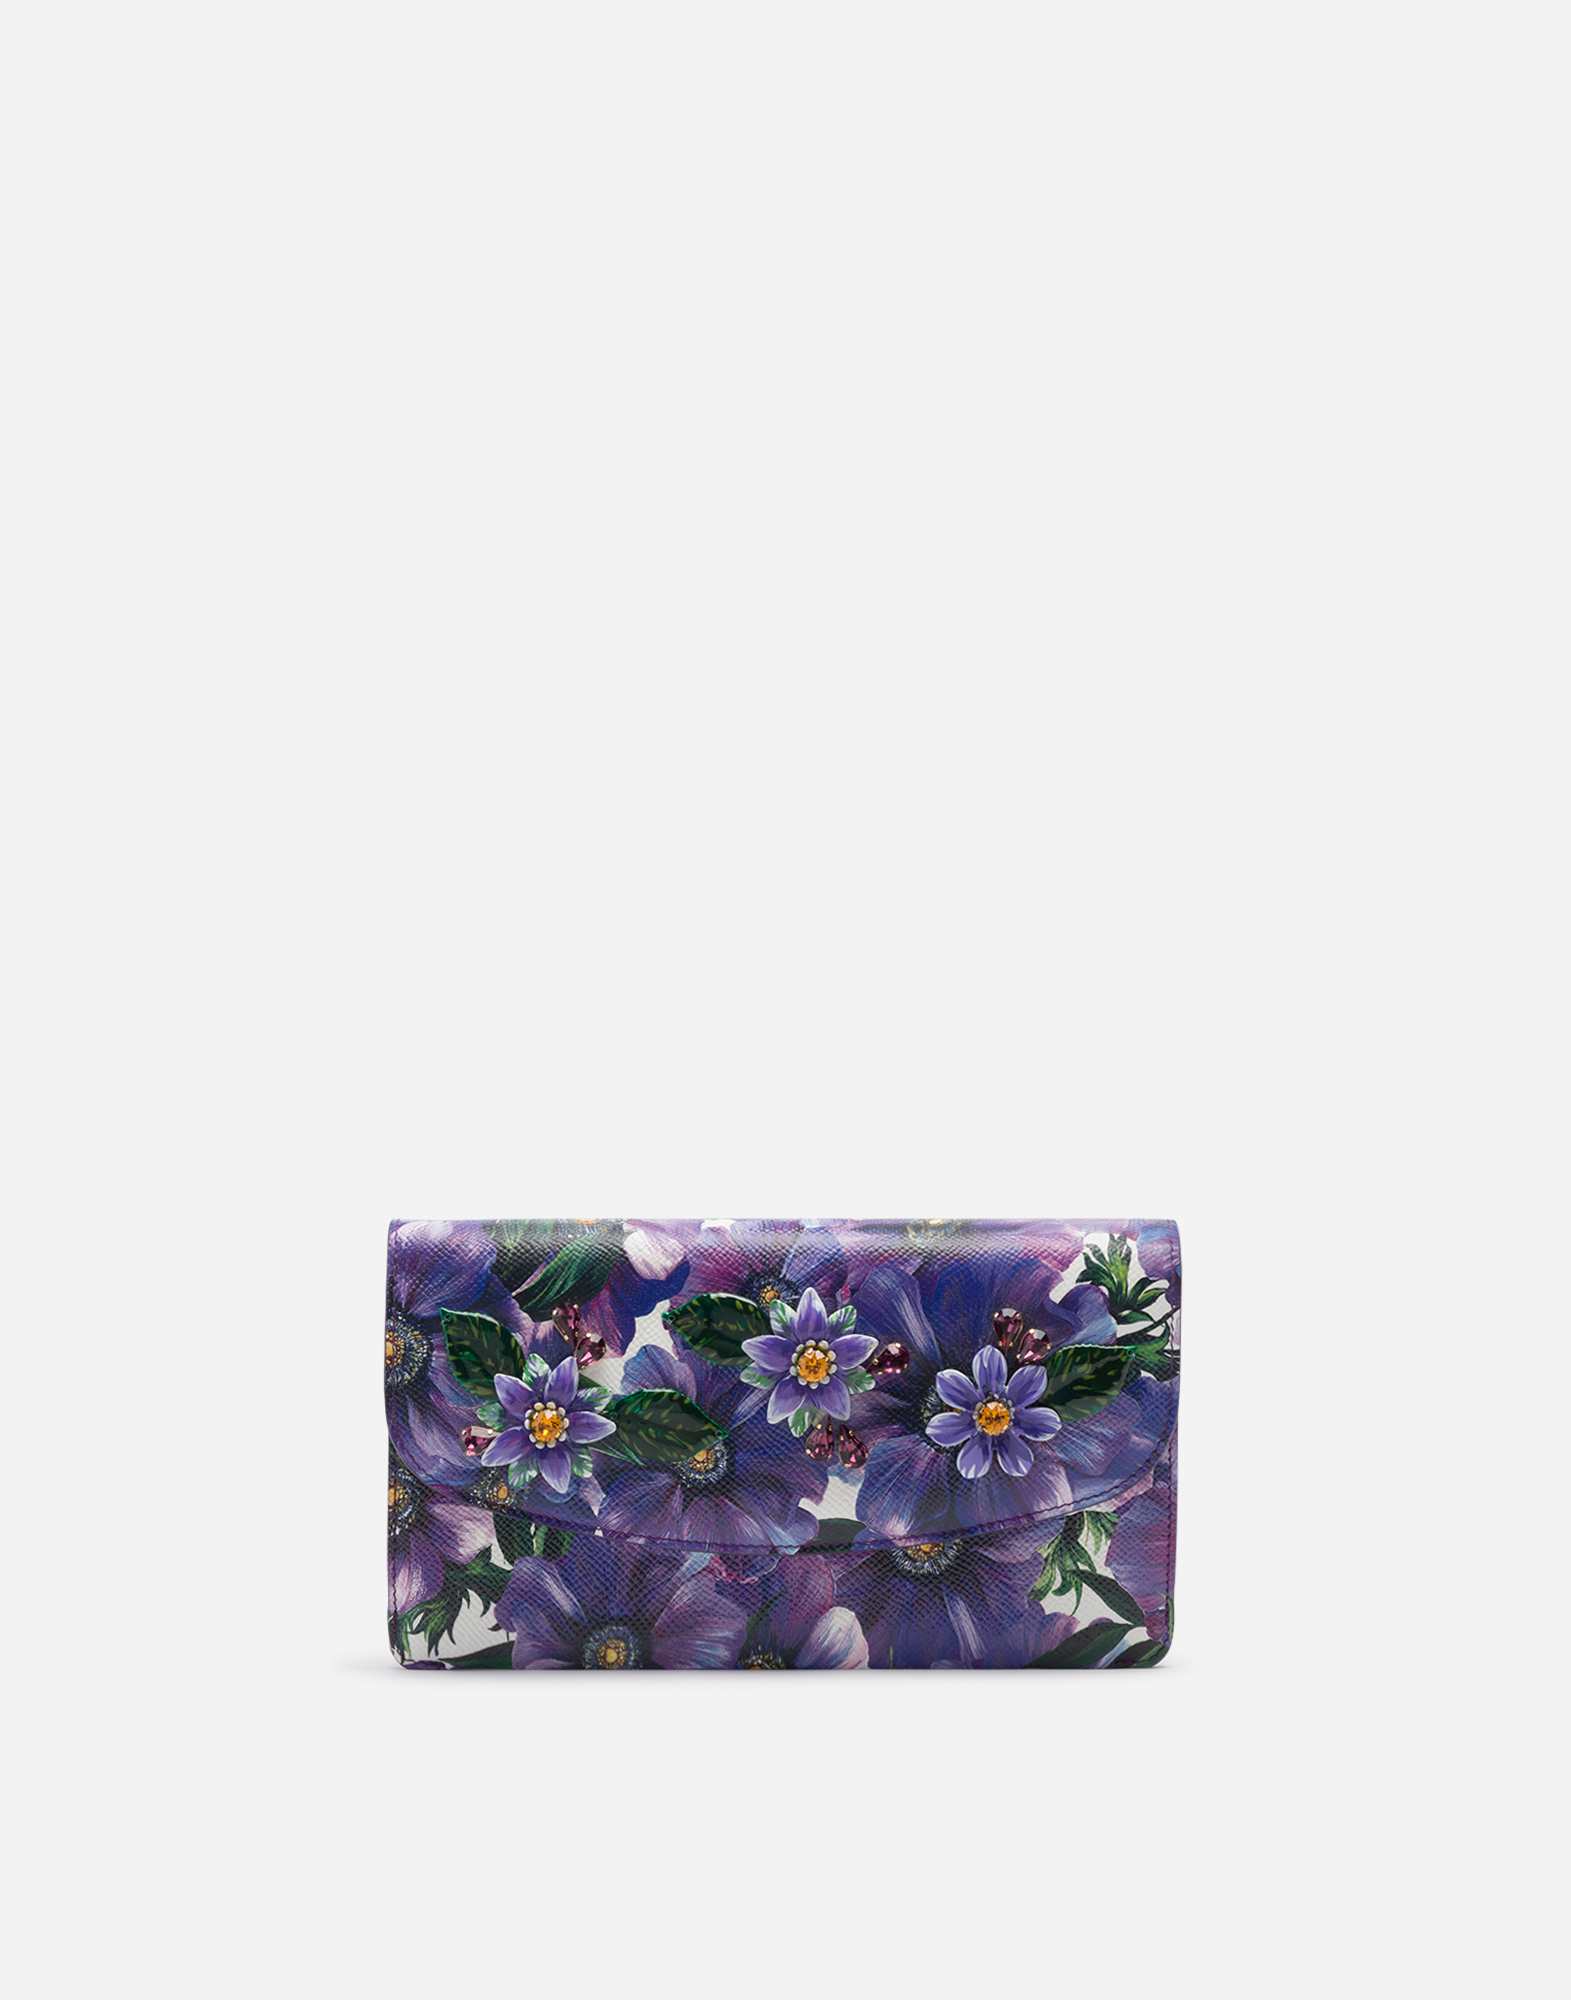 Dolce & Gabbana Dauphine Calfskin Mini Bag With Anemone Print And Embroidery In Floral Print